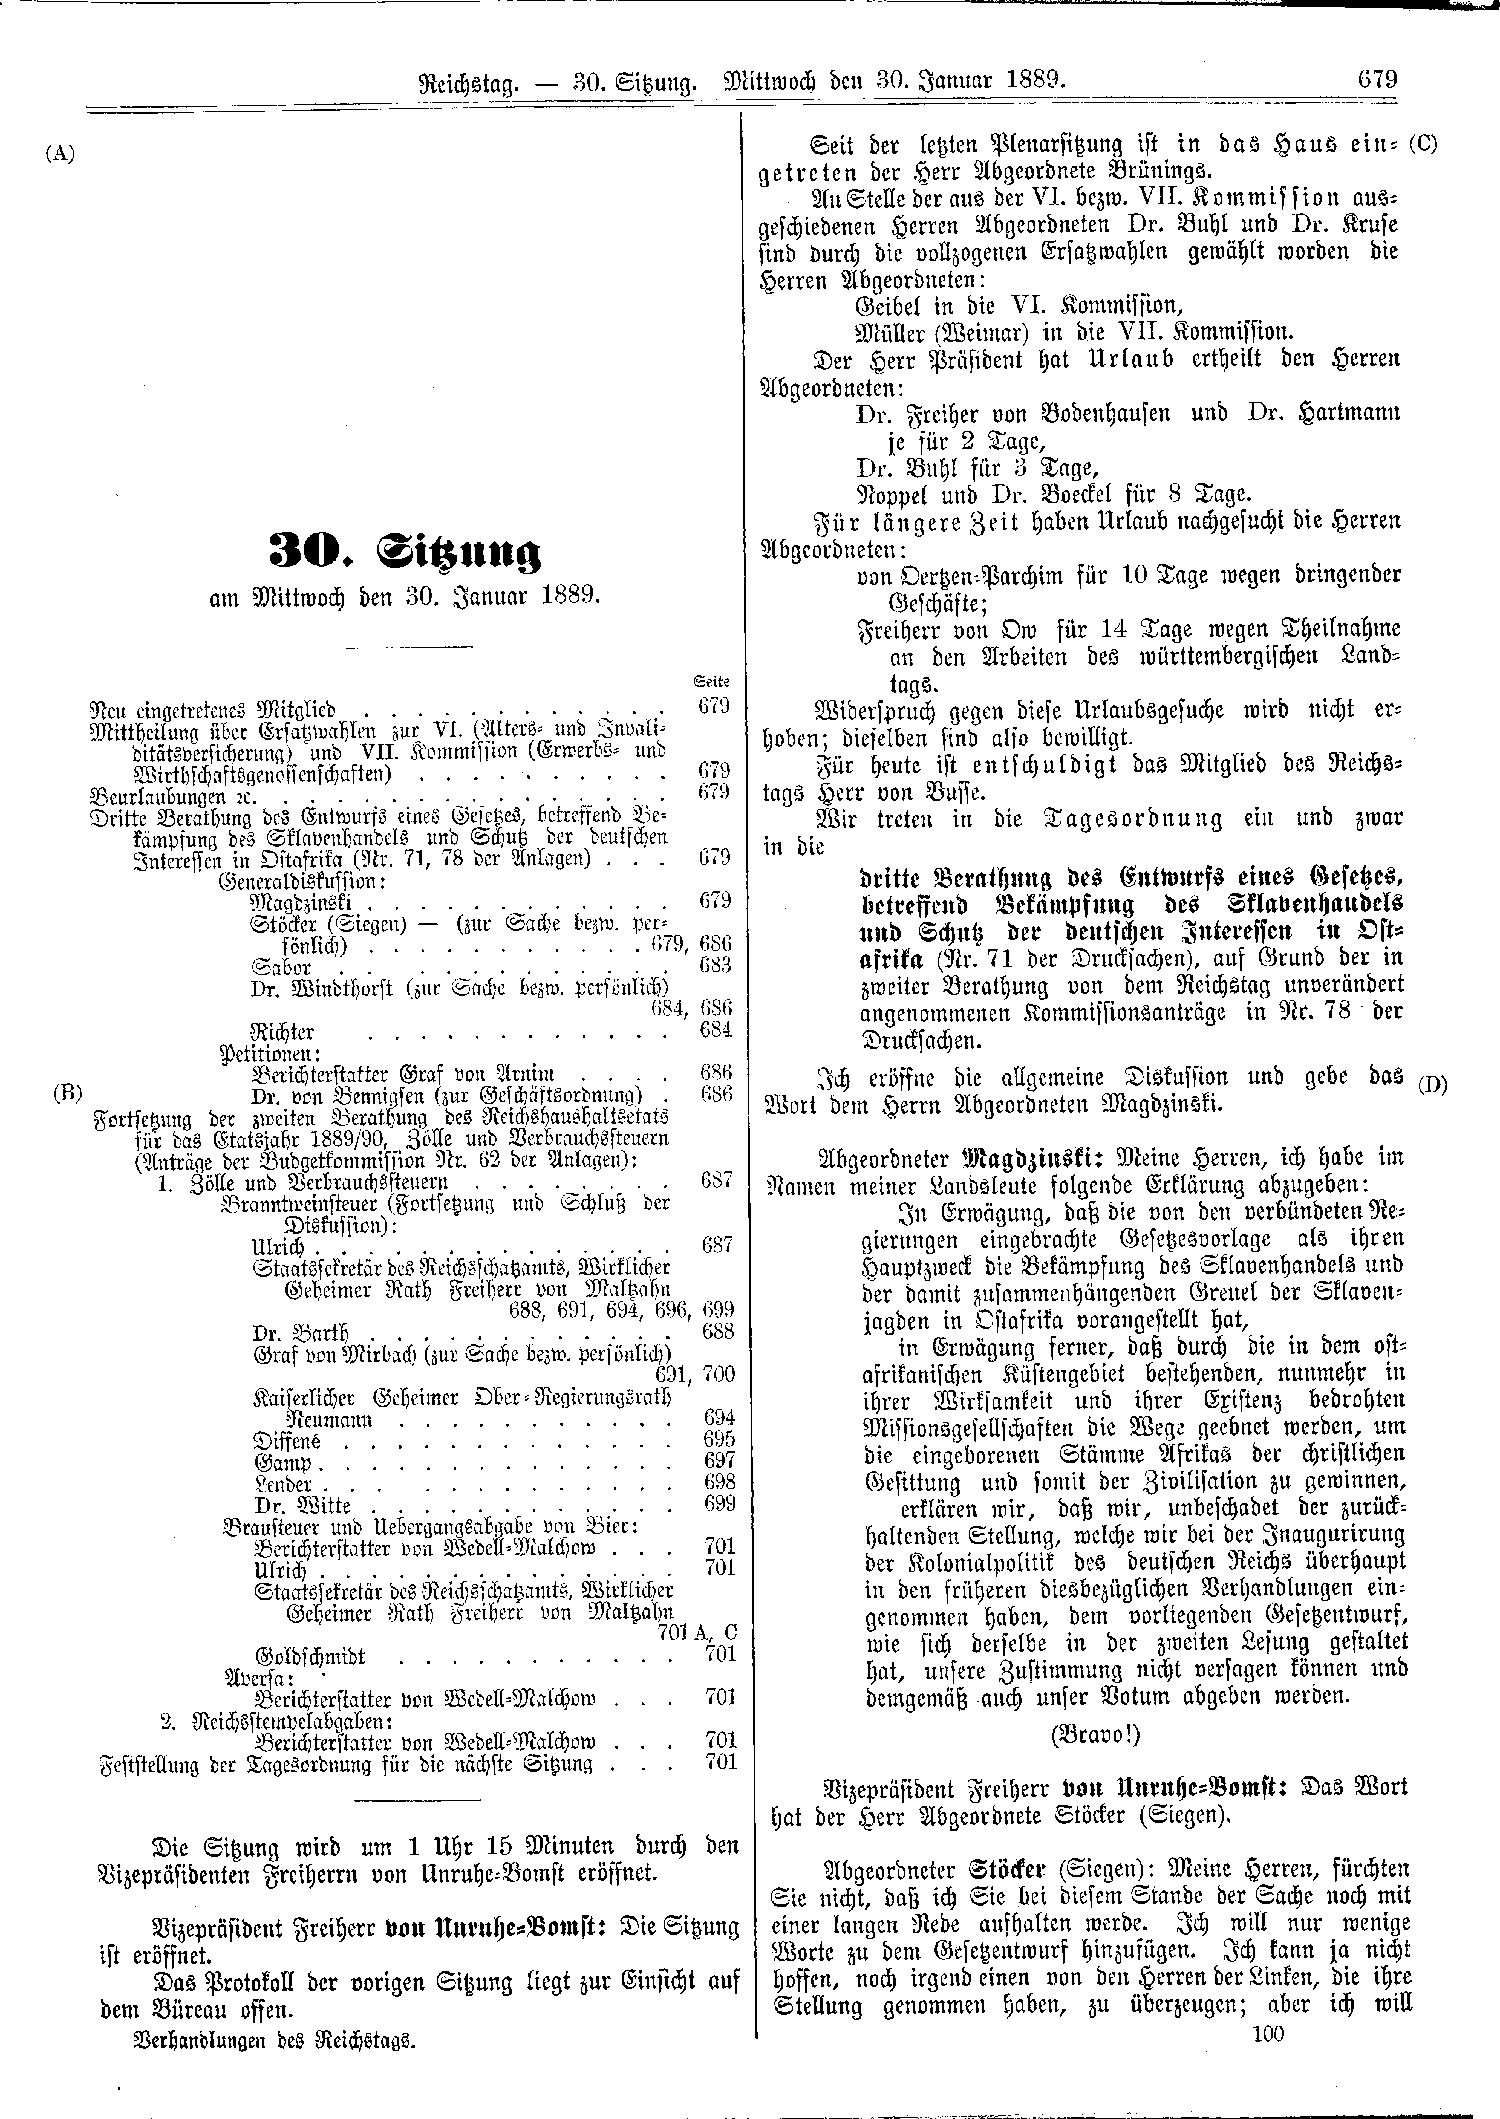 Scan of page 679